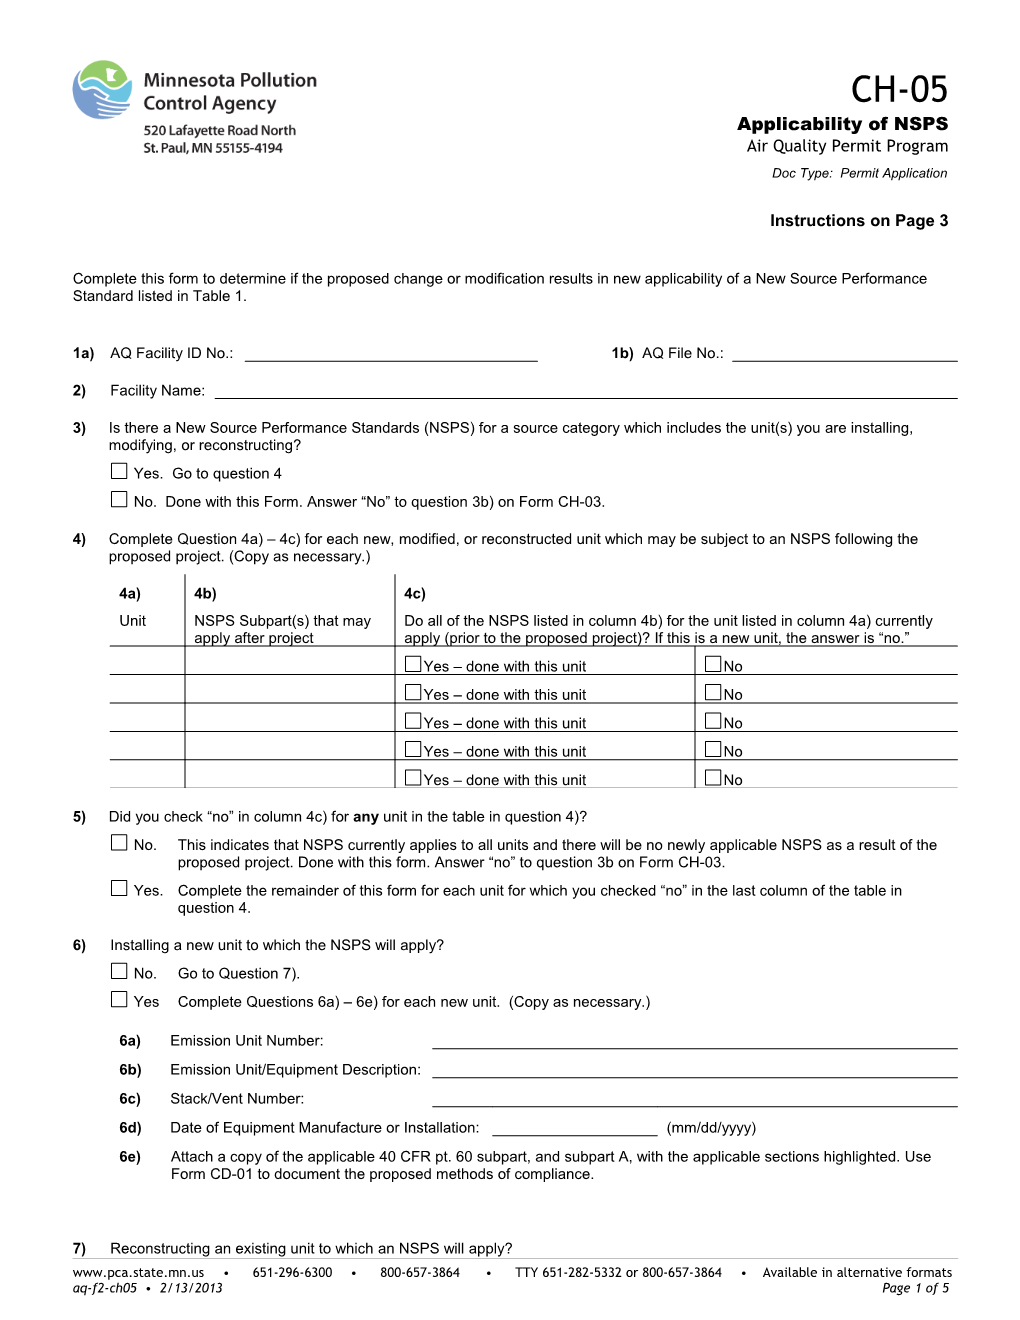 CH-05 Applicability of NSPS - Air Quality Permit Program - Form